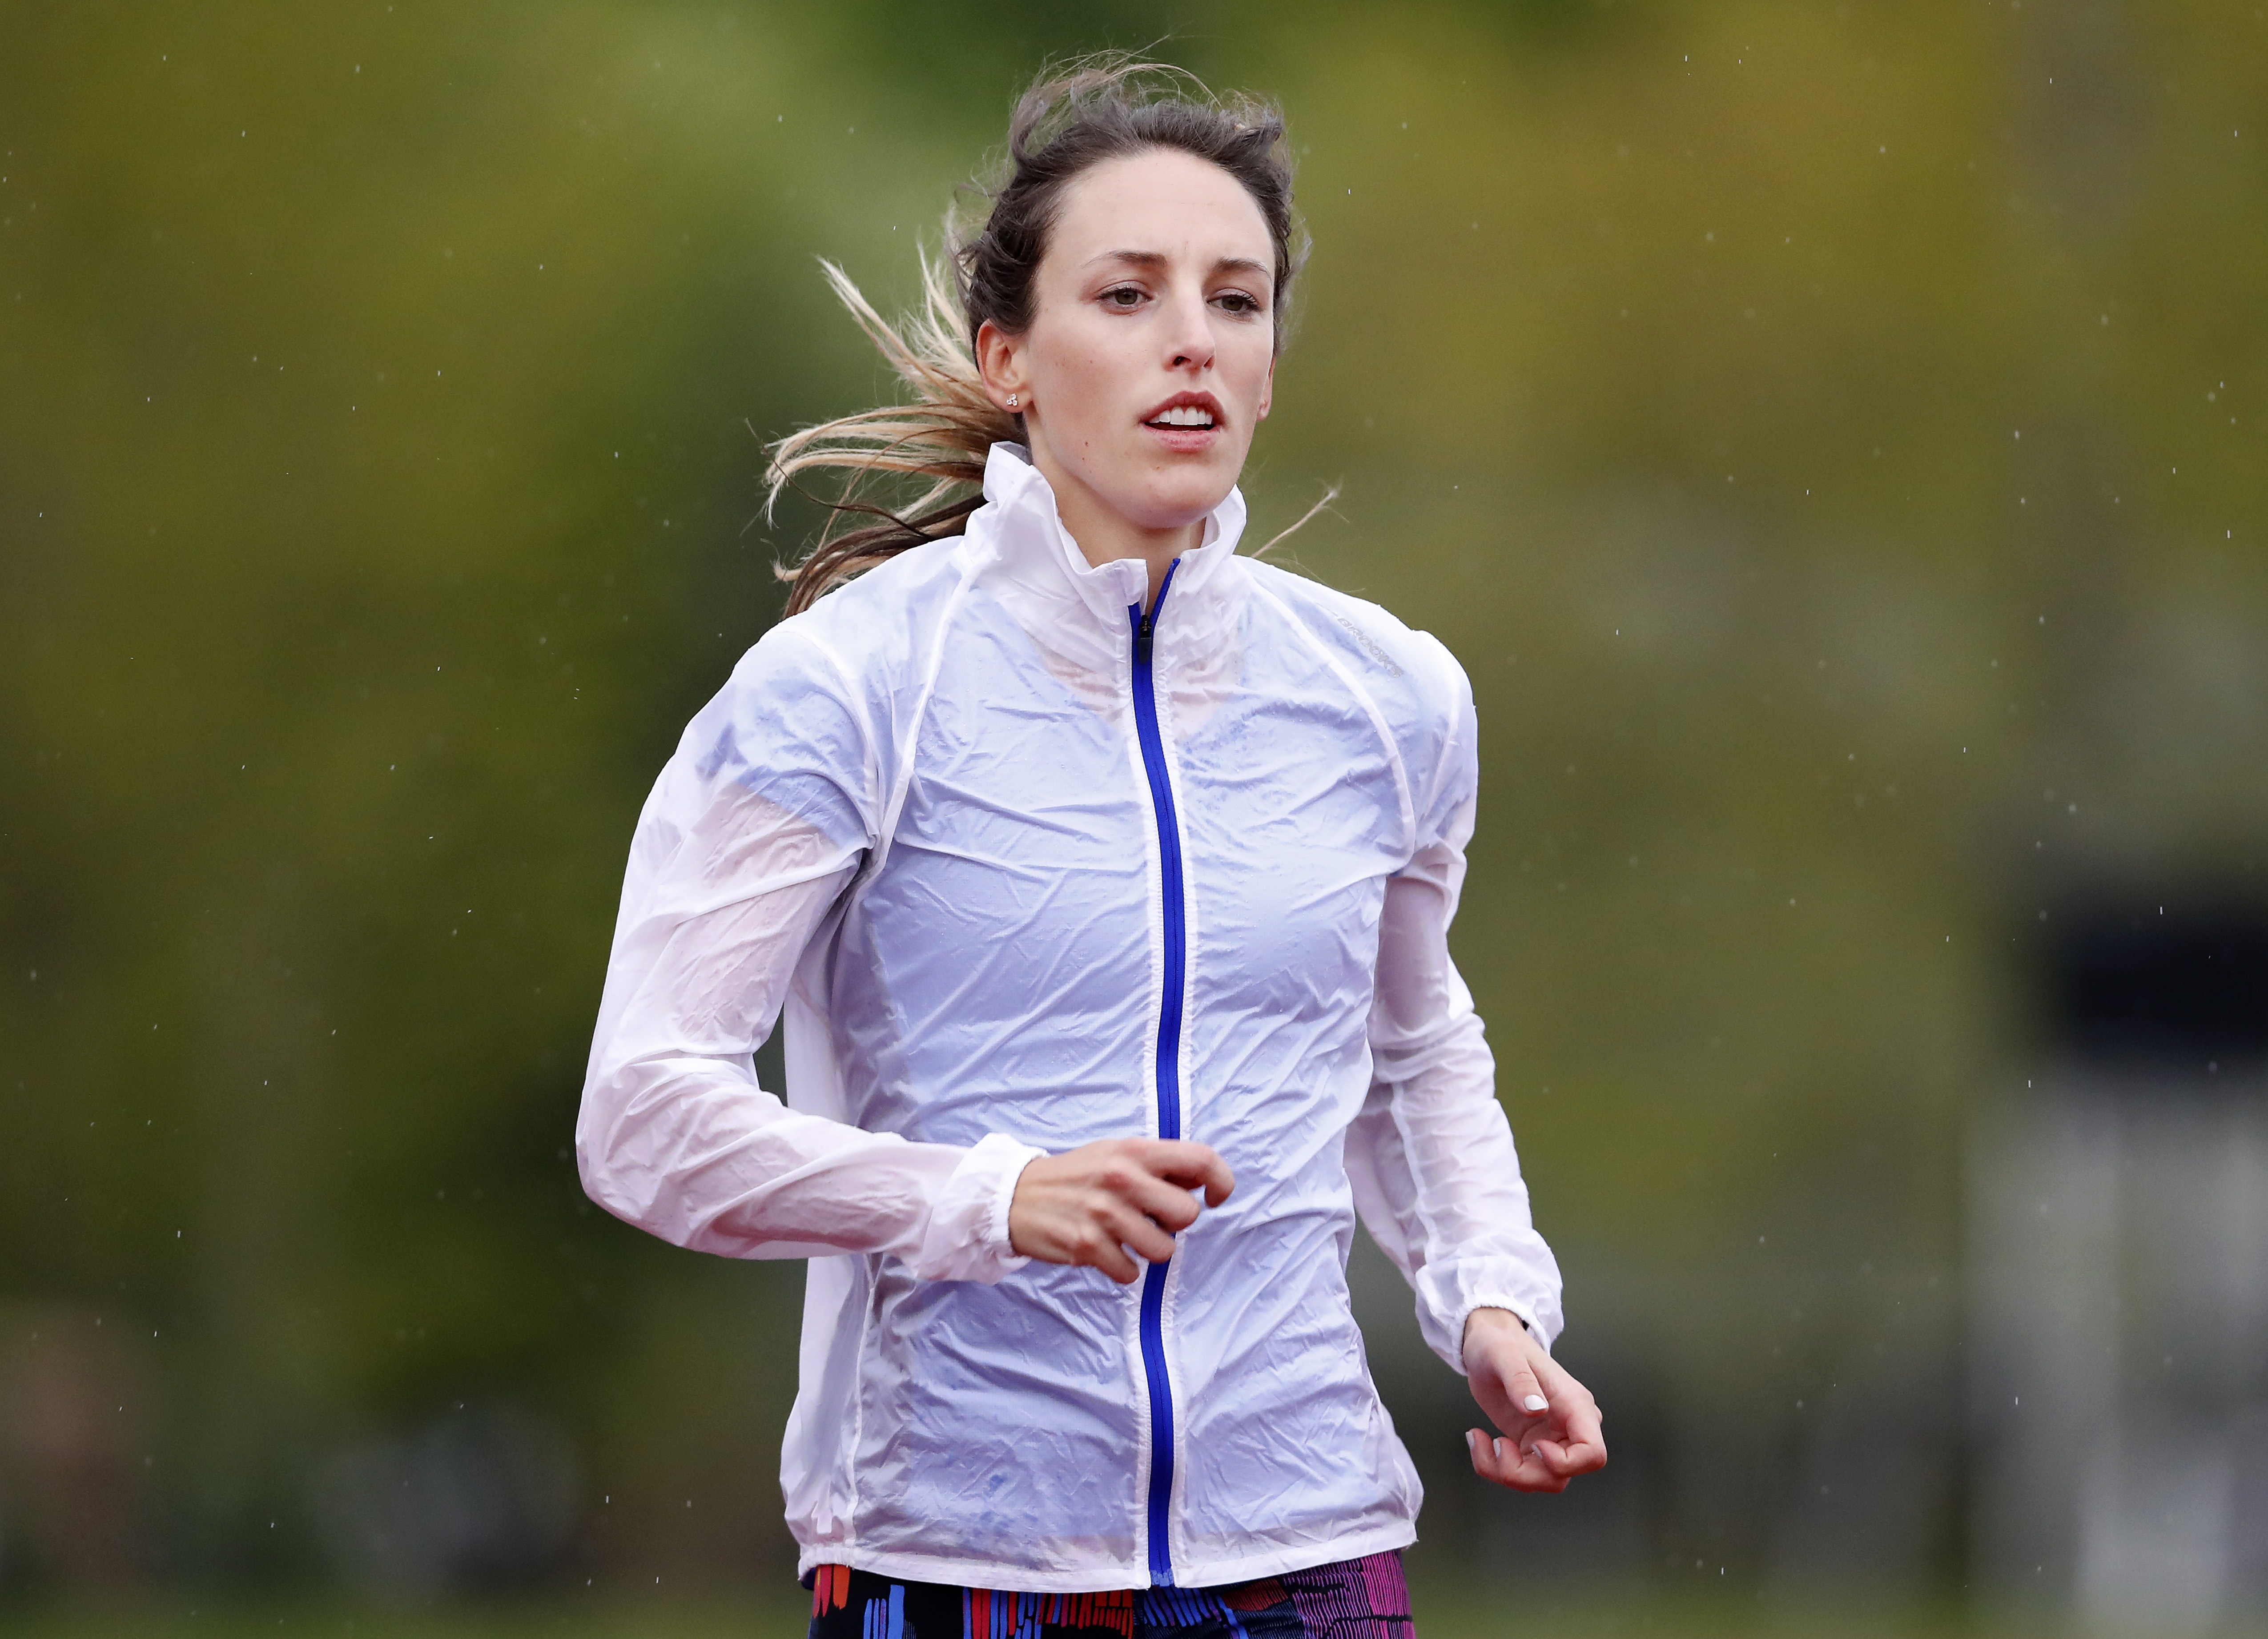 Gabriele "Gabe"Grunewald trains at Macalester College in St. Paul, Minn, May 8, 2017. The Minnesota championship runner who has inspired many during her long, public fight against cancer is in grave condition. Grunewald's husband says she was moved to comfort care at a Minneapolis hospital Sunday, June 9, 2019. (Carlos Gonzalez/Star Tribune via AP)